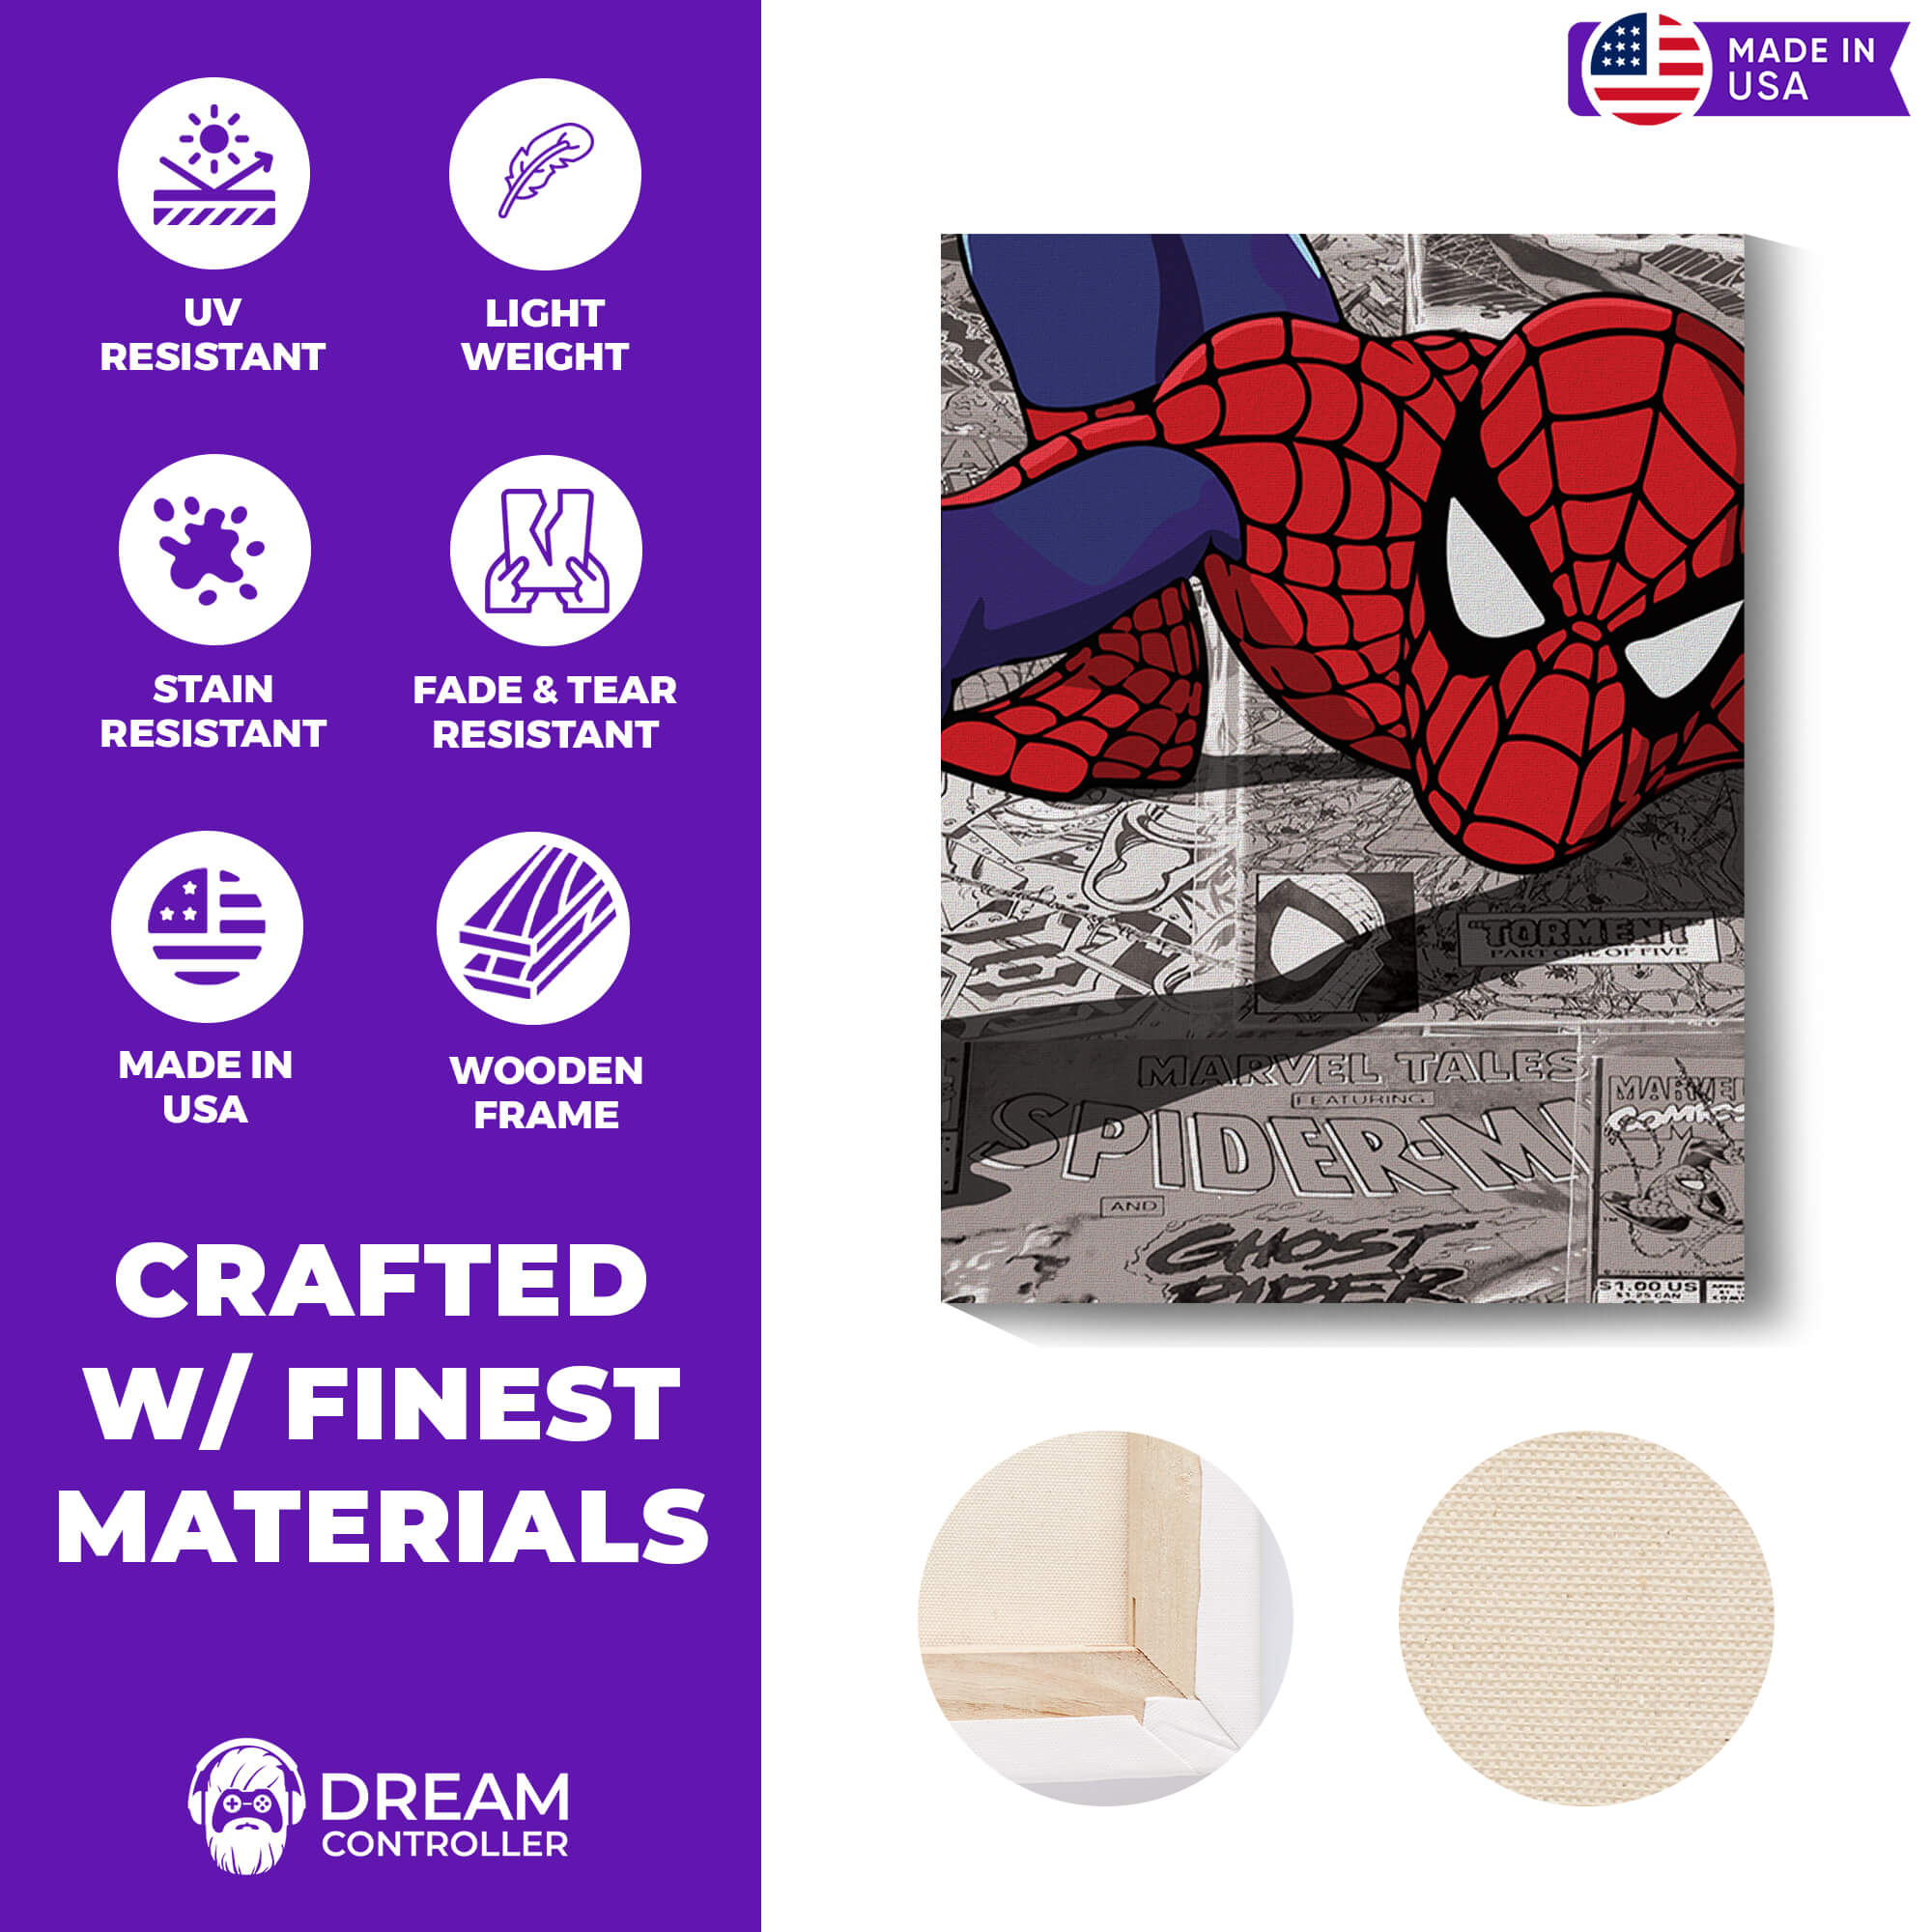 Spiderman Wall Canvas -Bring Spiderman's Action to Your Wall